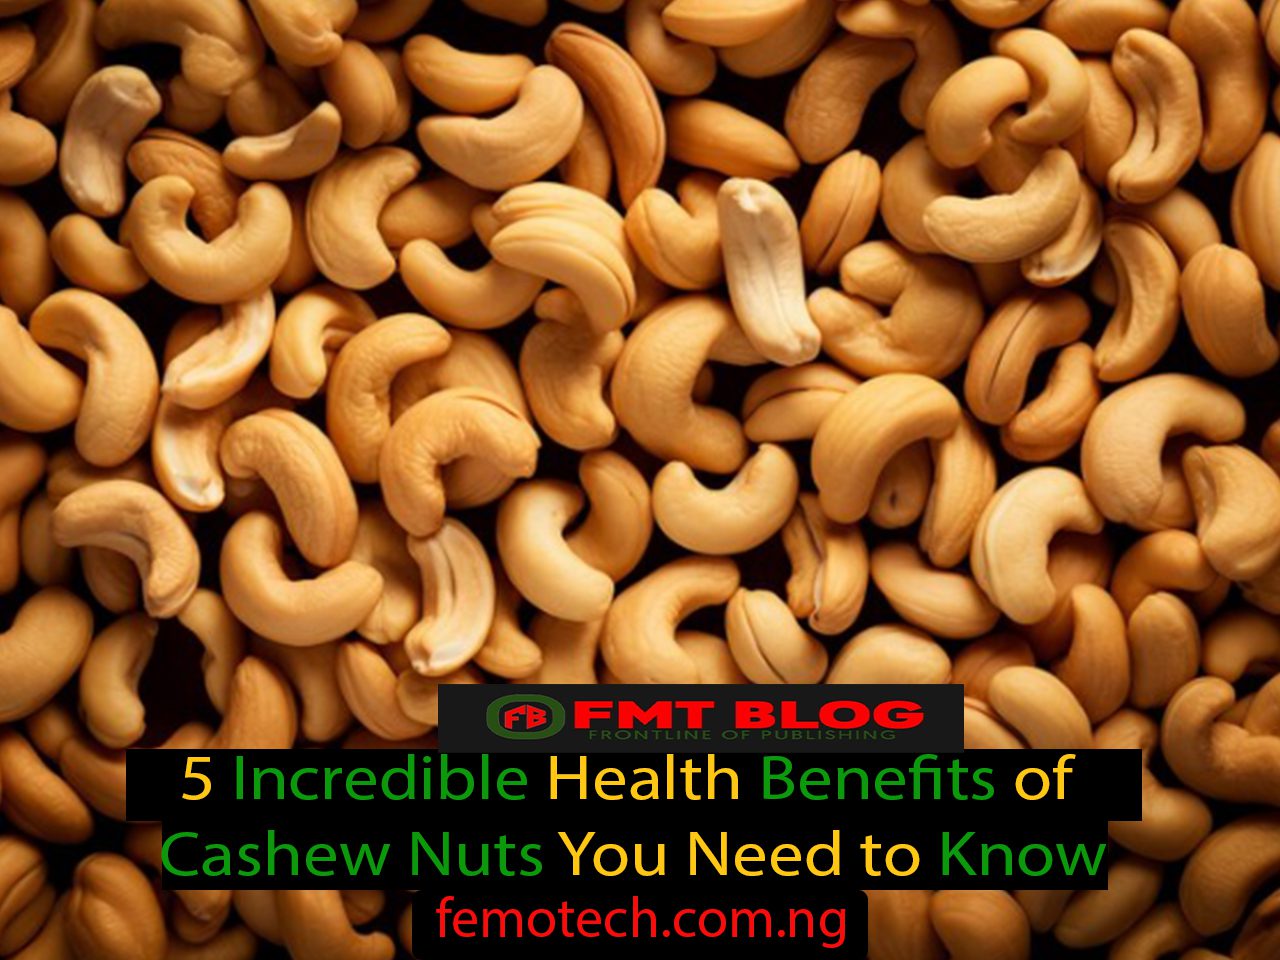 5 Incredible Health Benefits of Cashew Nuts You Need to Know